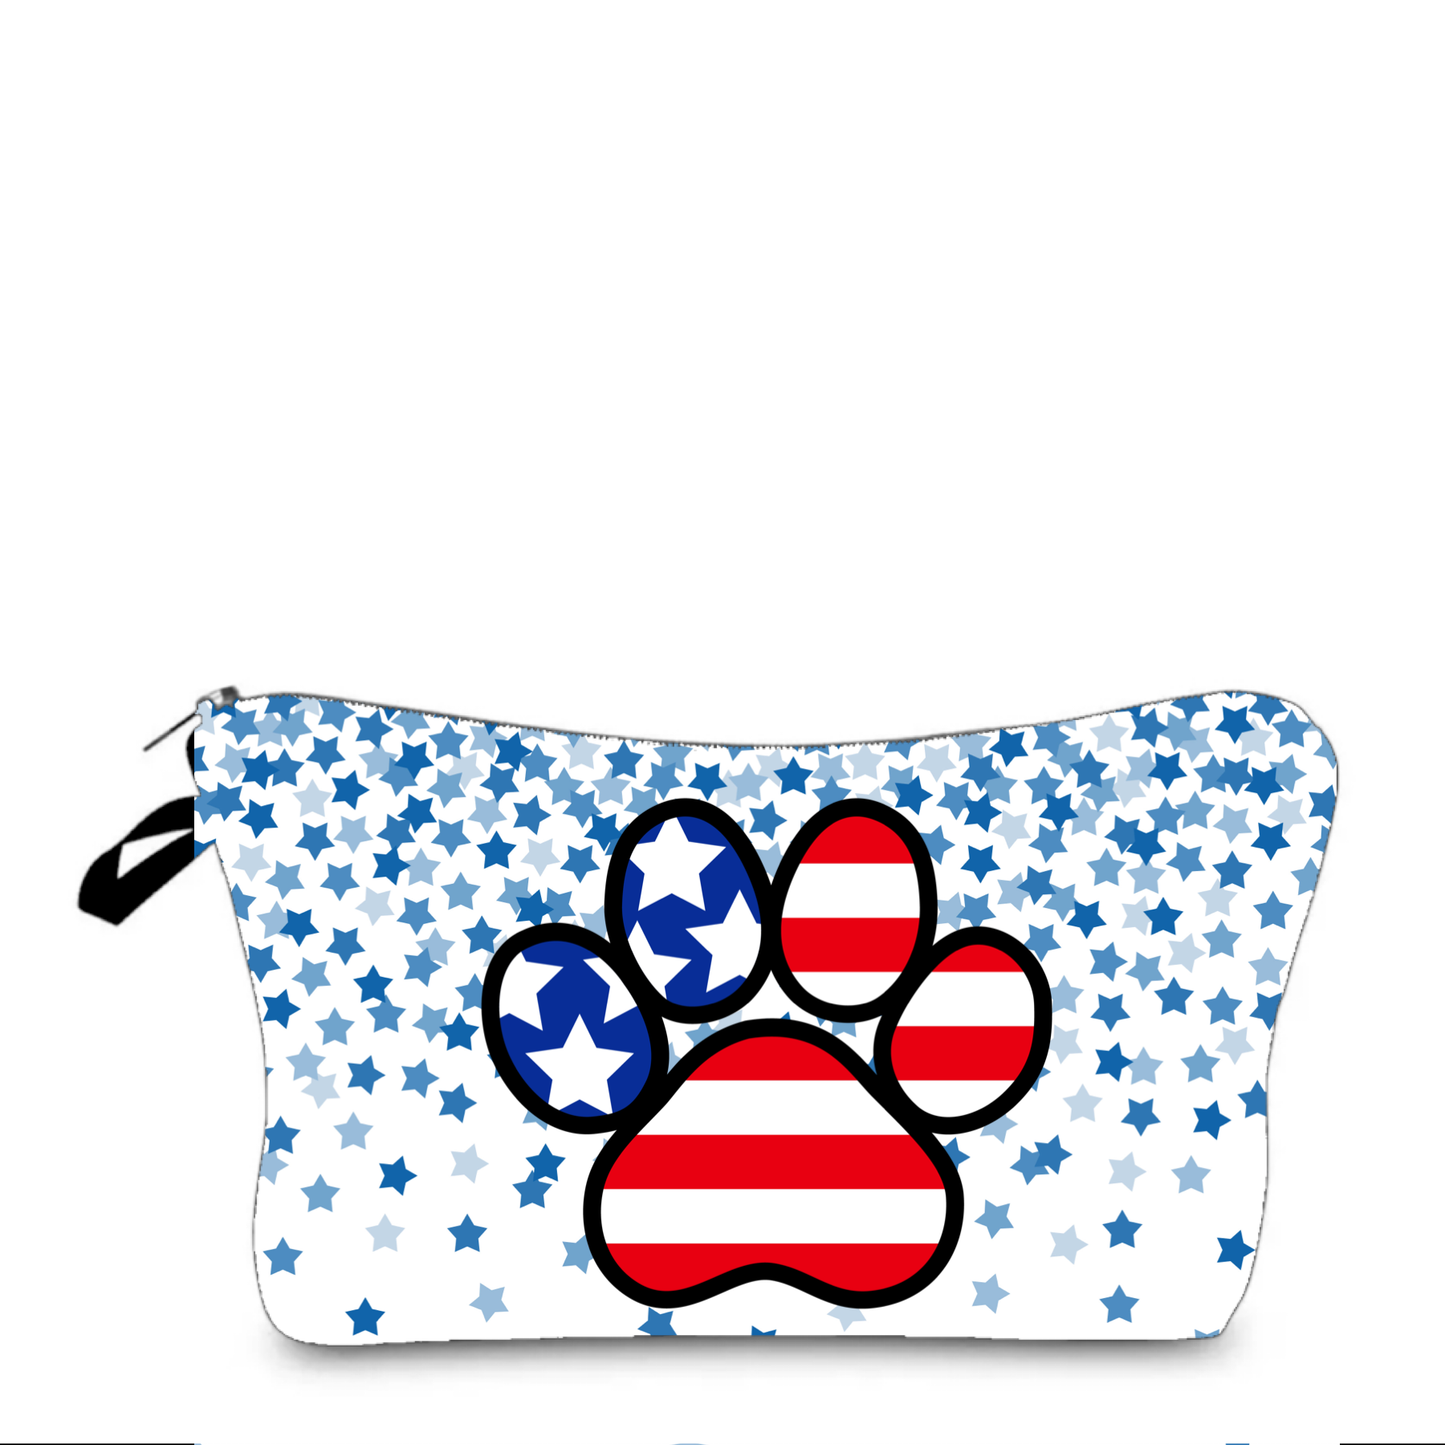 Patriotic Paw - USA - July 4th - Americana - Water-Resistant Multi-Use Pouch